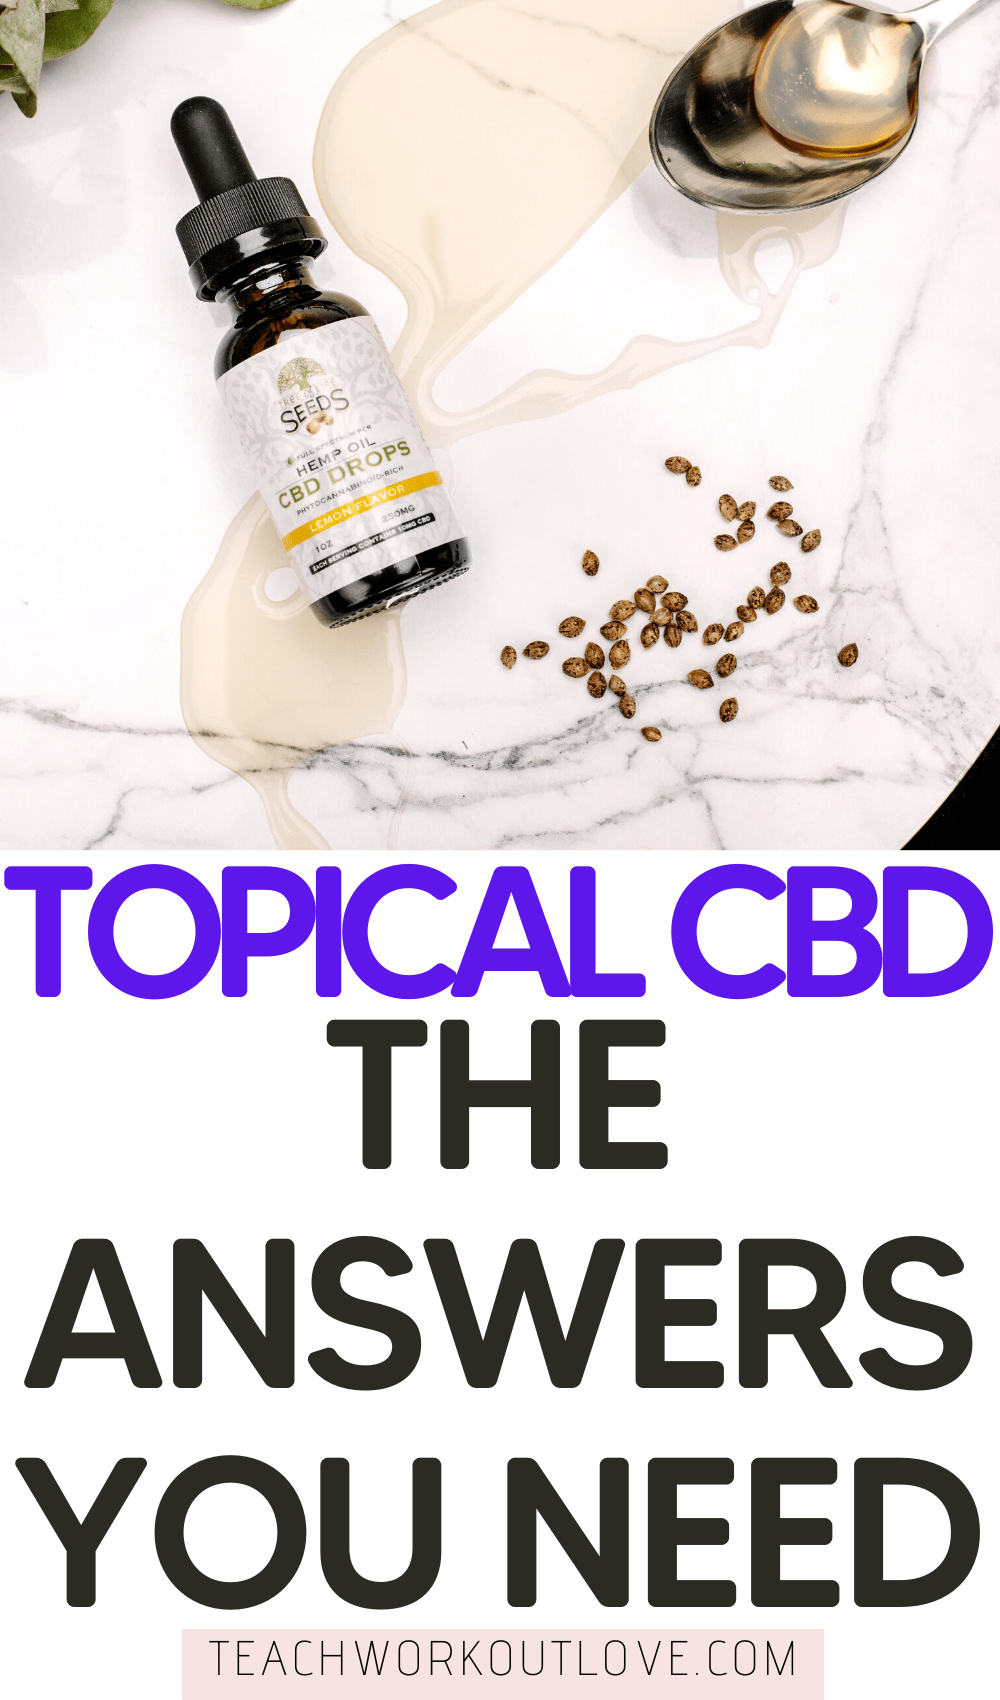 Topical CBD is the newest product. Luckily we have the answers to some of the most frequently asked questions about topical CBD. You’ll find those below.